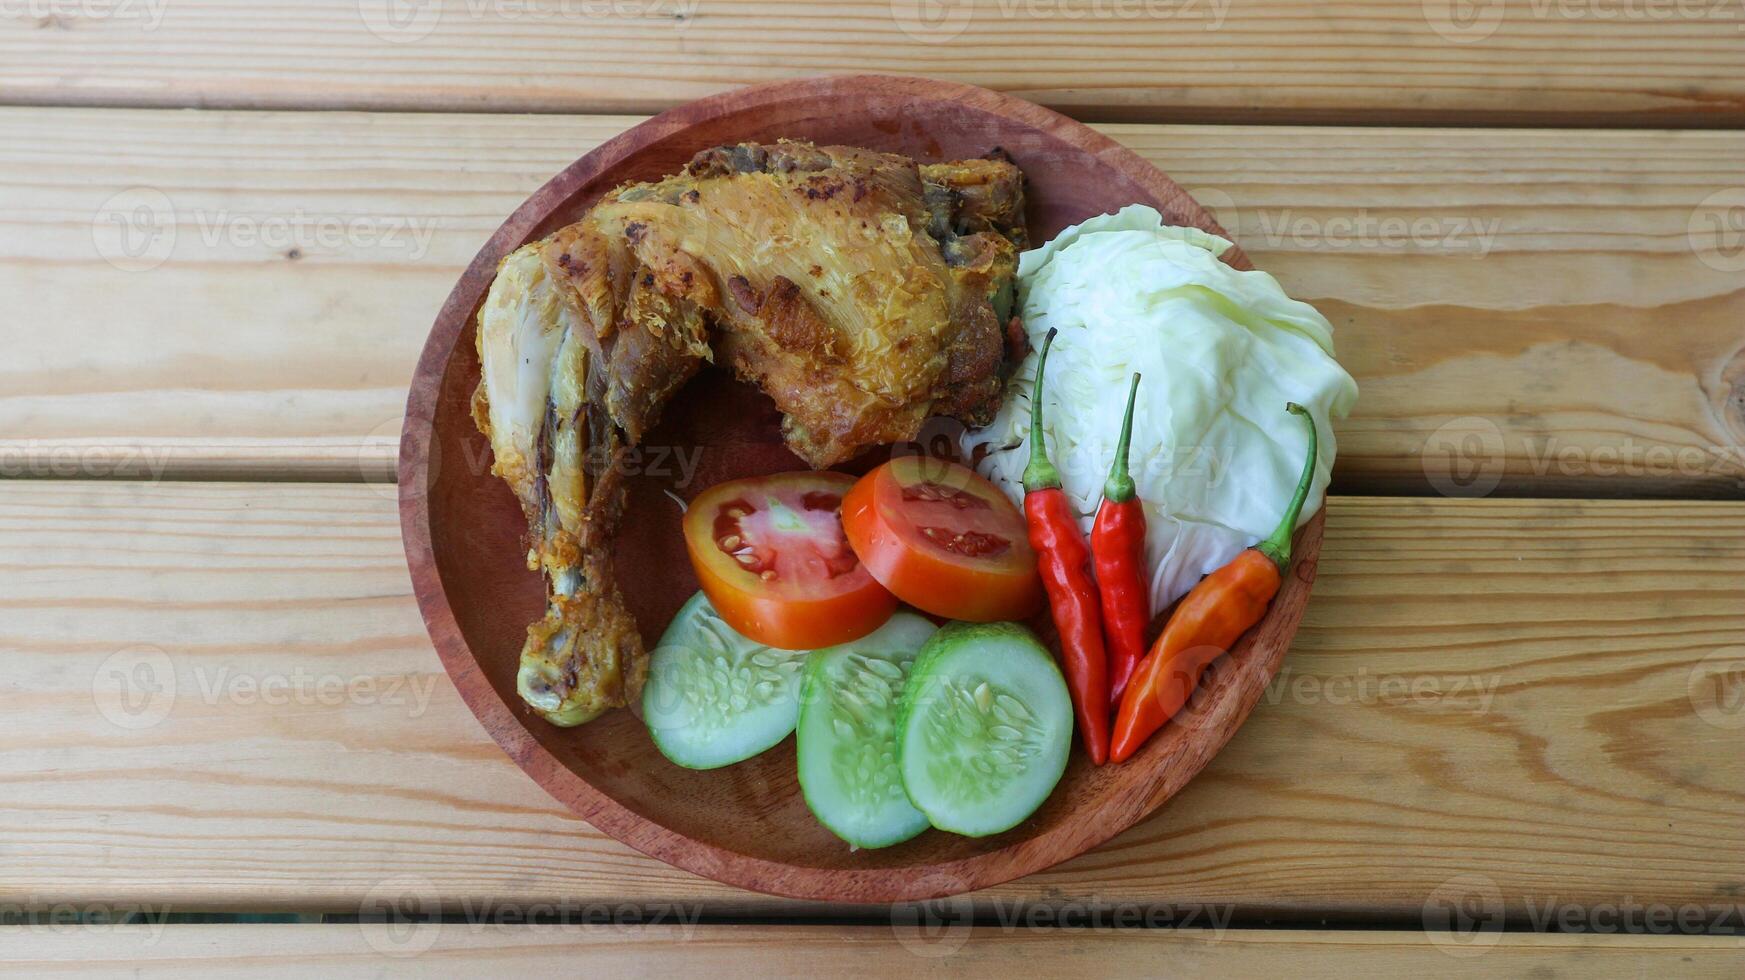 Fried Chicken with Lalapan, Fried Chicken with Fresh Vegetables, Tomato Slices, Cucumber and sambal Authentic Recipe of Indonesian Chicken Lalapan. Fried chicken on a Wooden Table. photo